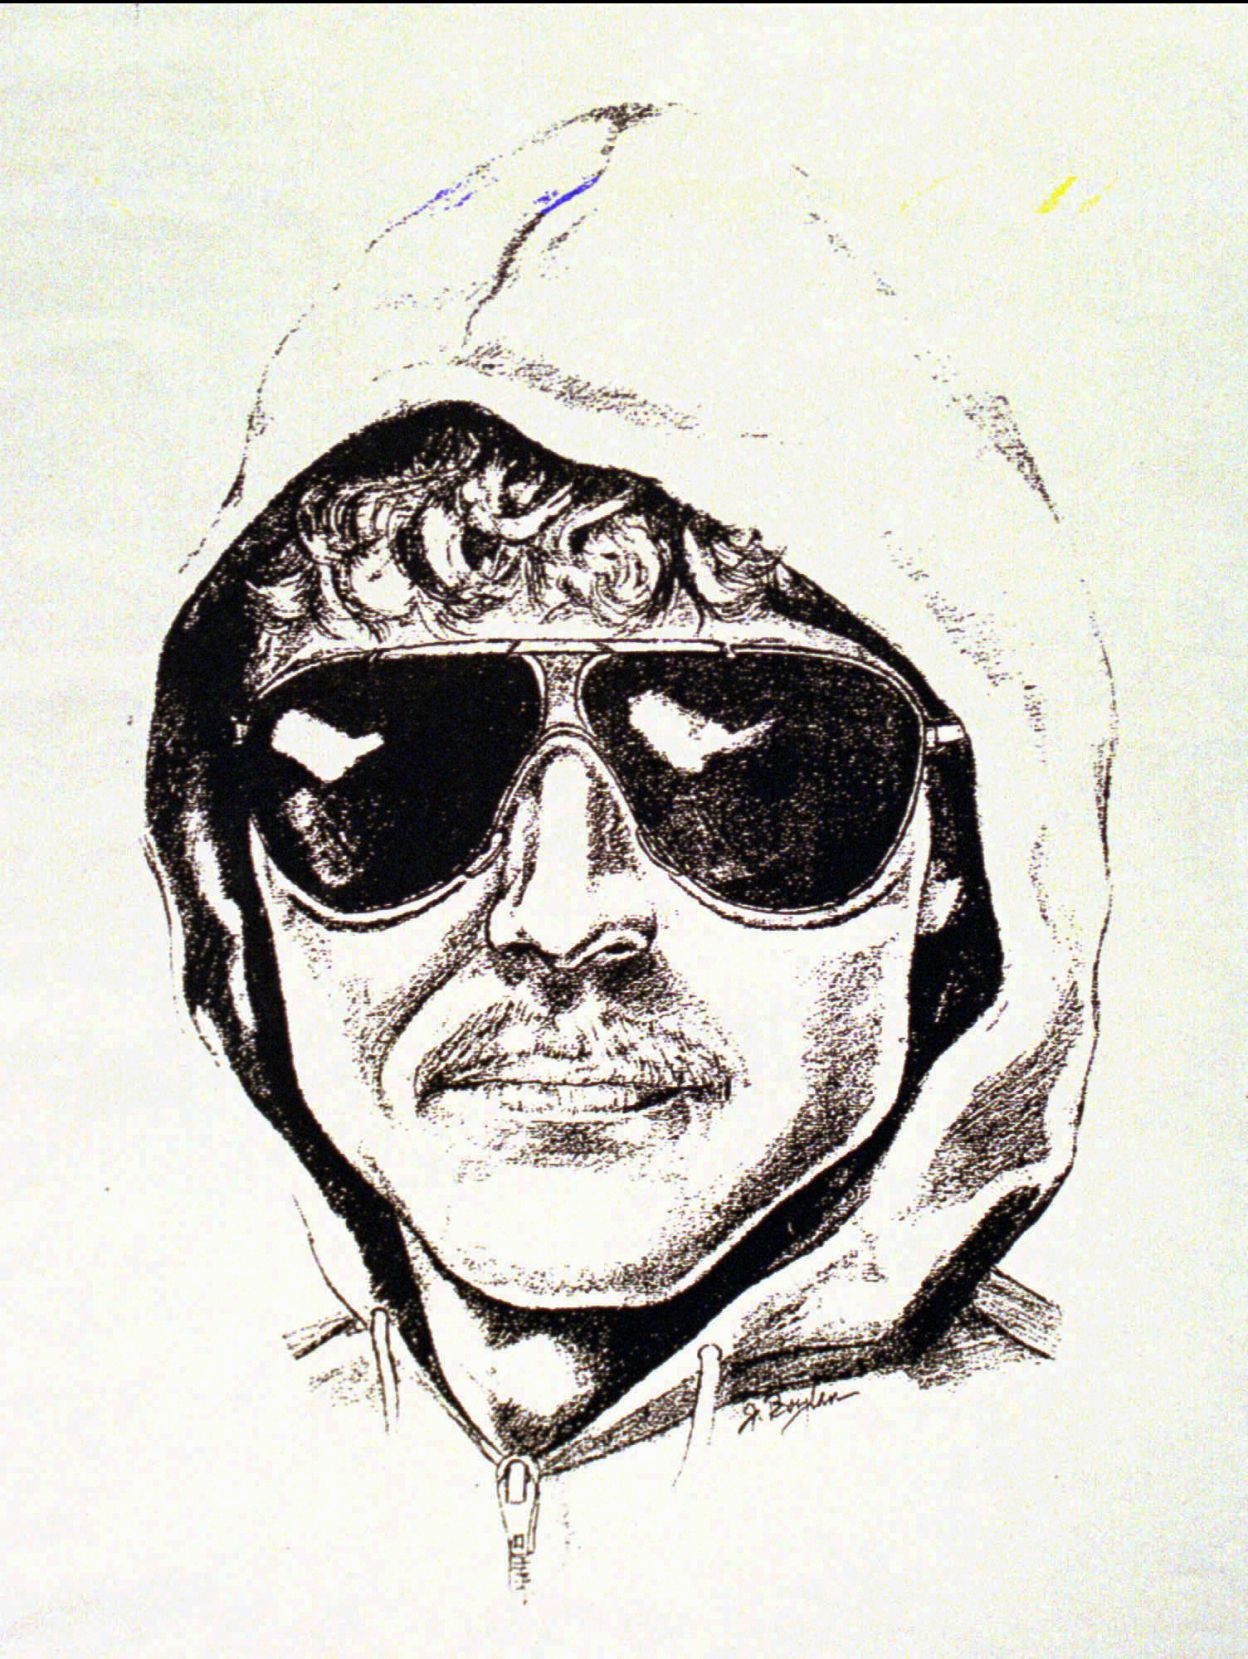 He found forgotten letters from the 70s in his attic Turns out they were  missives from the Unabomber